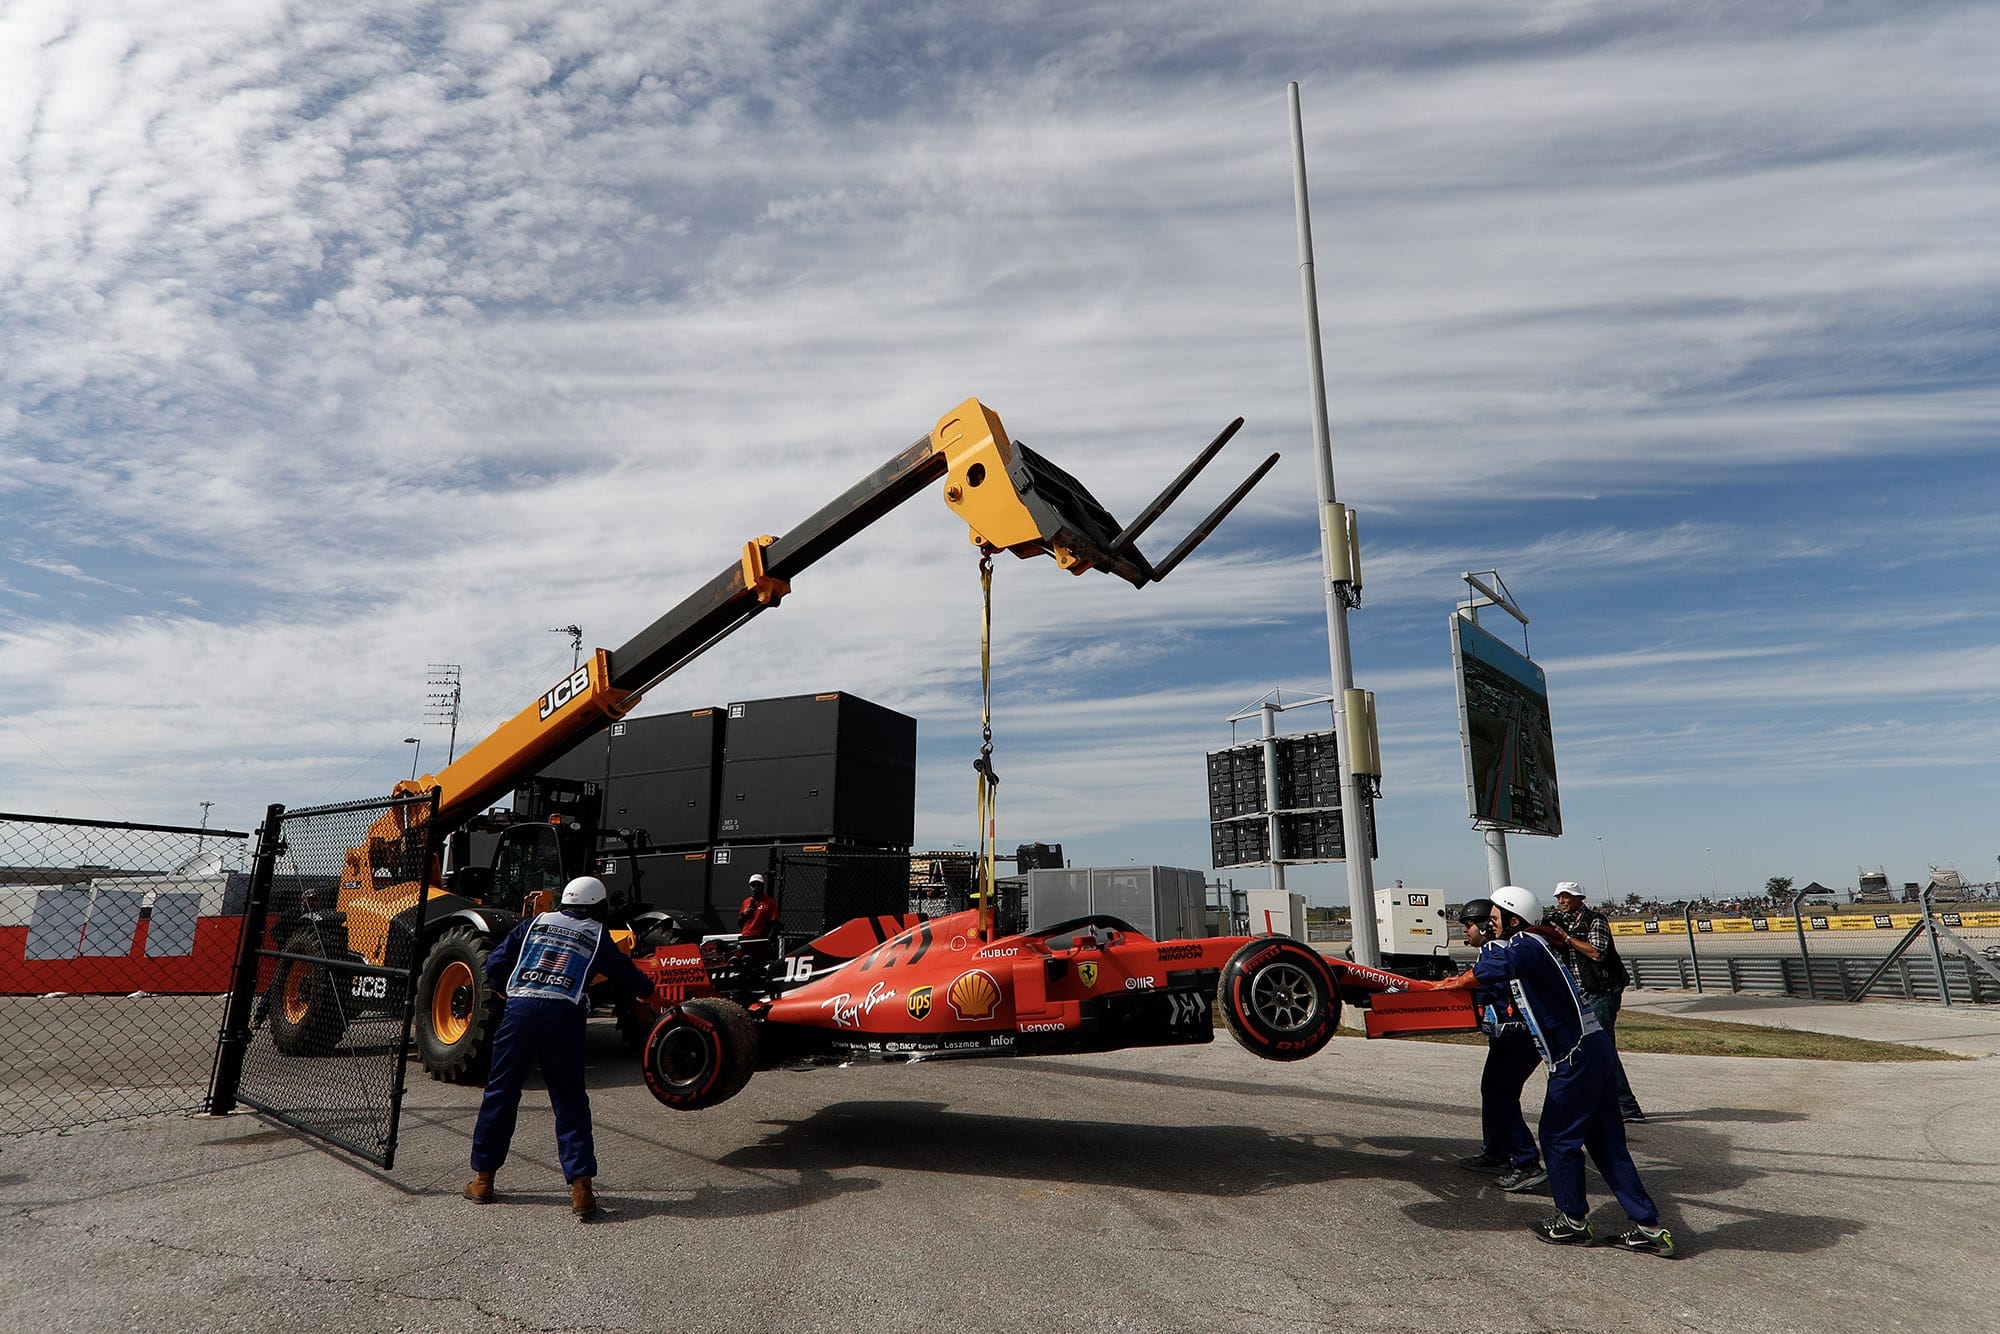 Charles Leclerc's car is lifted away from the circuit at the 2019 United States Grand Prix after suffering an oil leak during practice